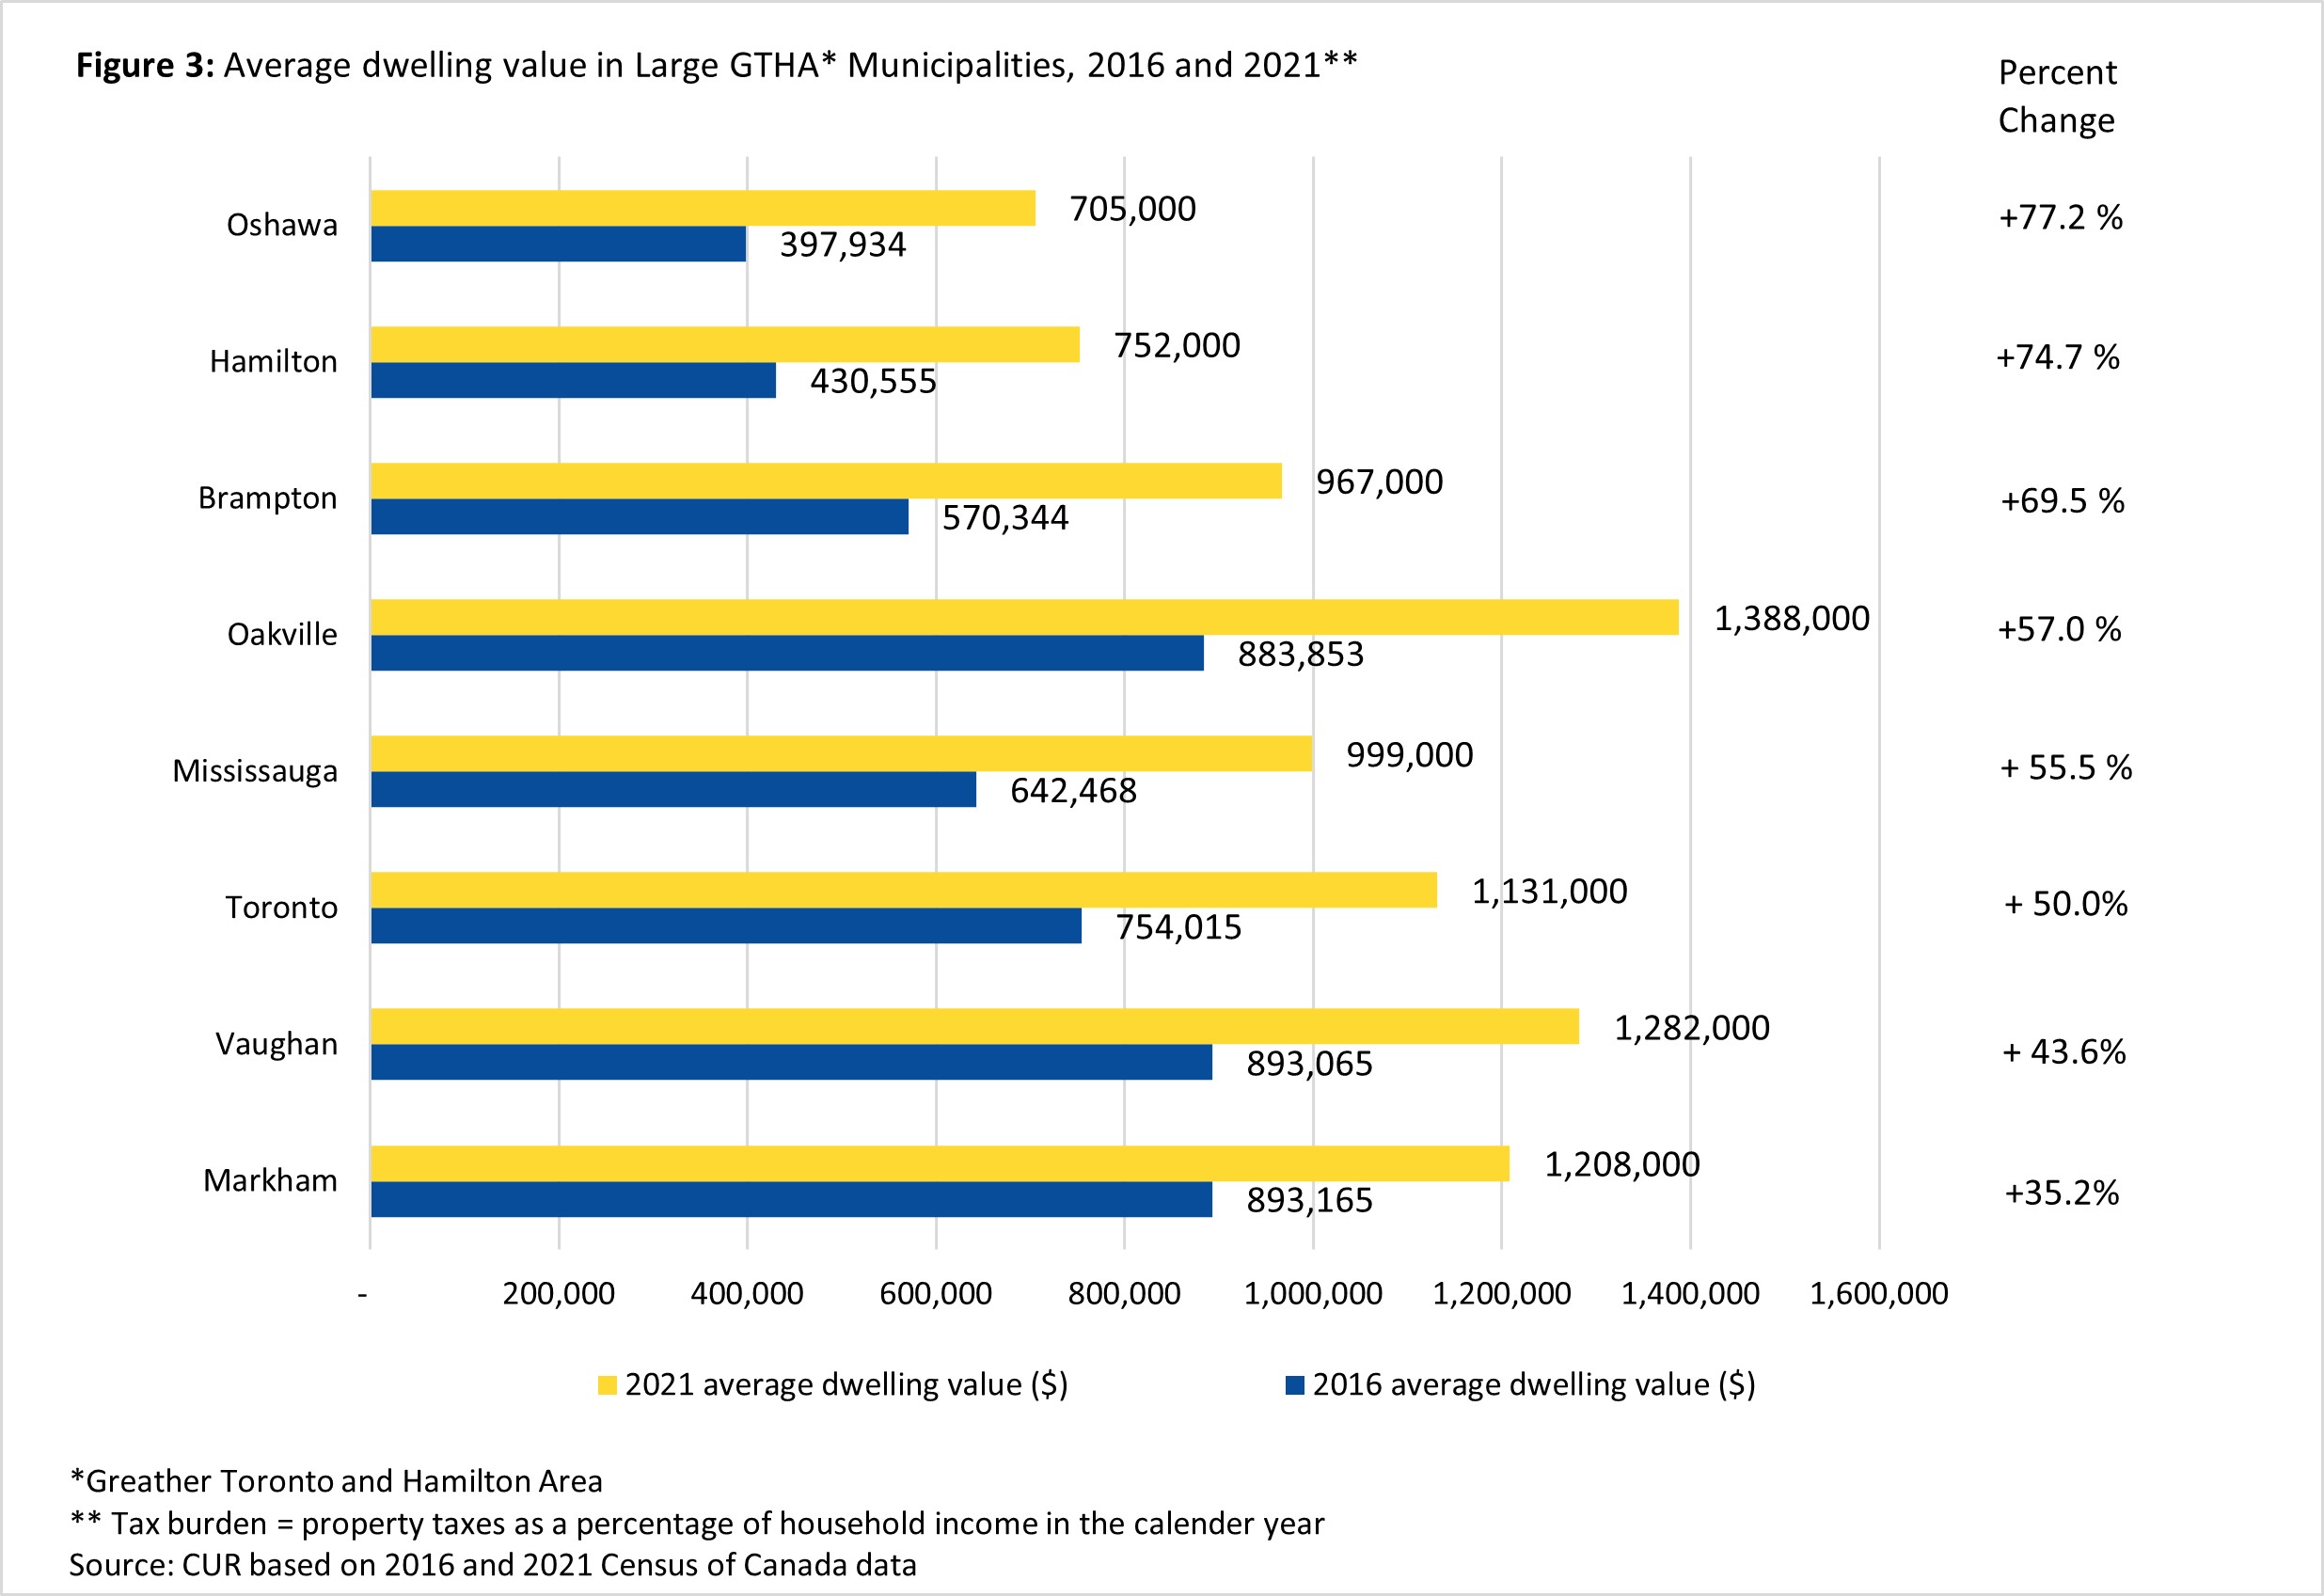 Average dwelling value in large GTHA municipalities, 2016 and 2021. Source: TMU CUR